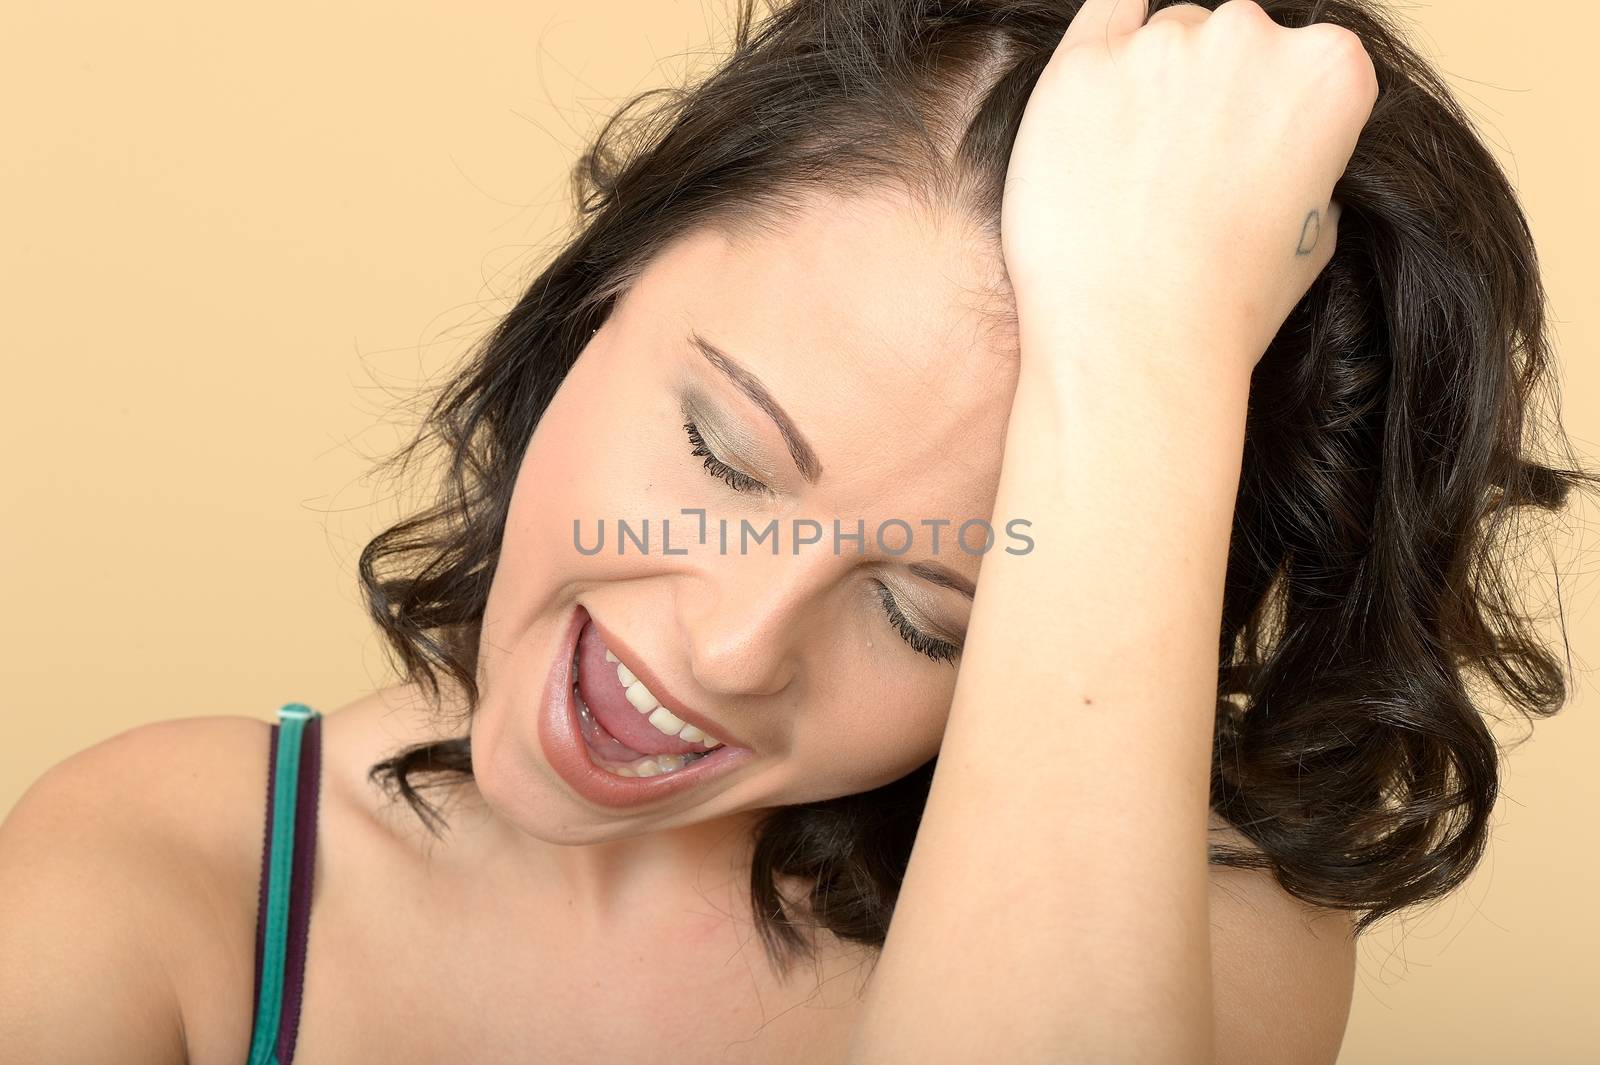 Angry Tense Attractive Young Woman Looking Stressed by Whiteboxmedia